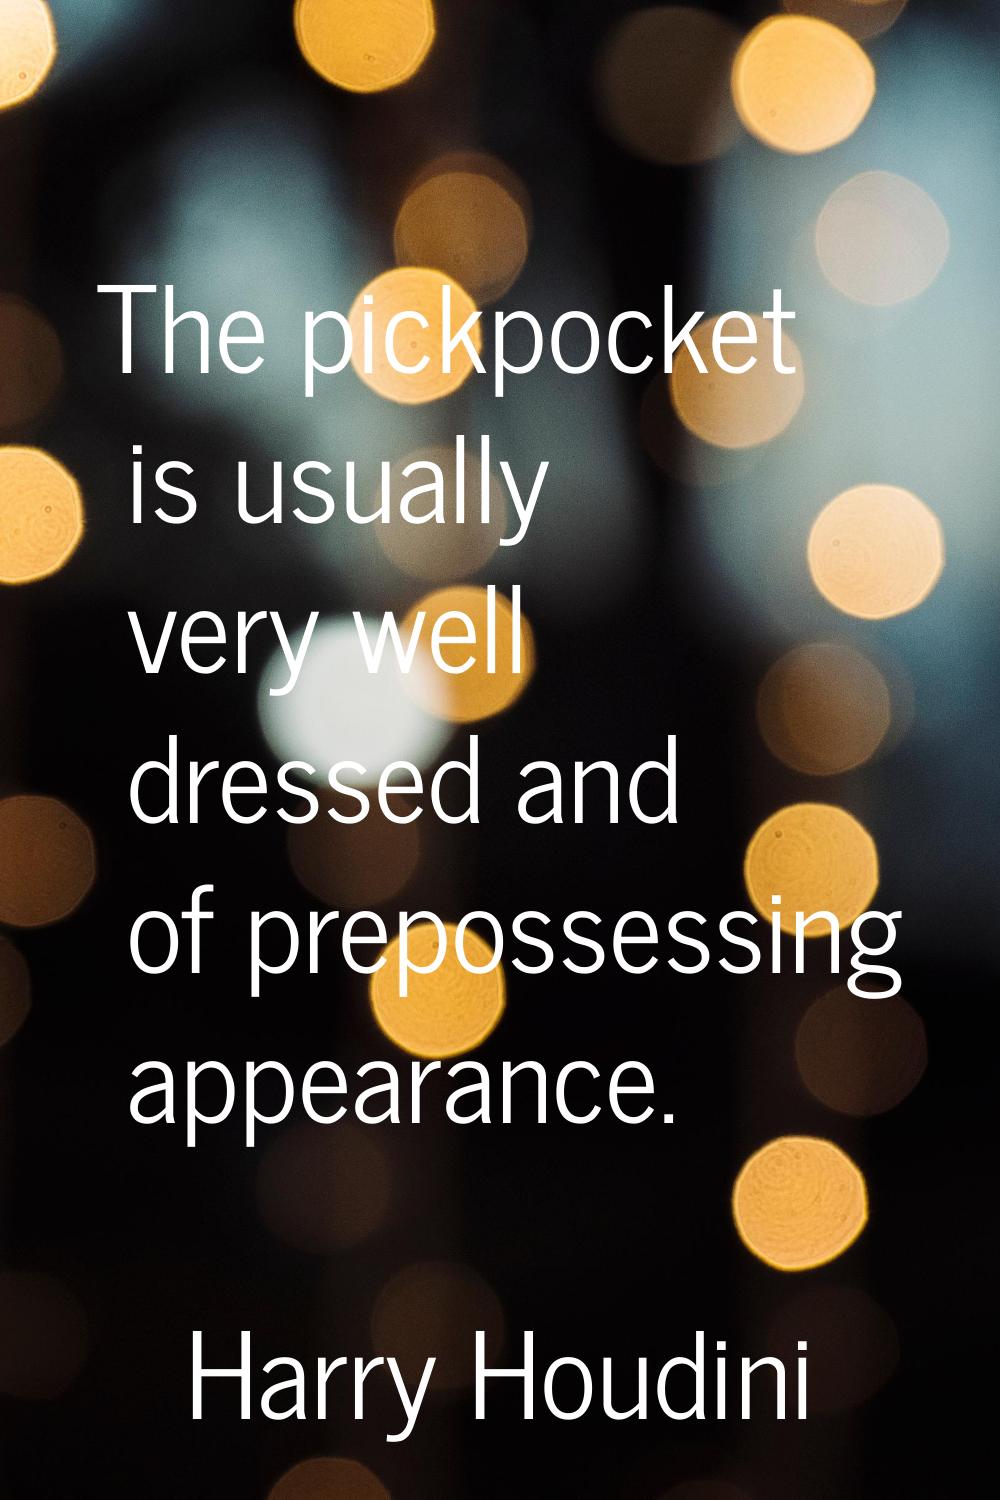 The pickpocket is usually very well dressed and of prepossessing appearance.